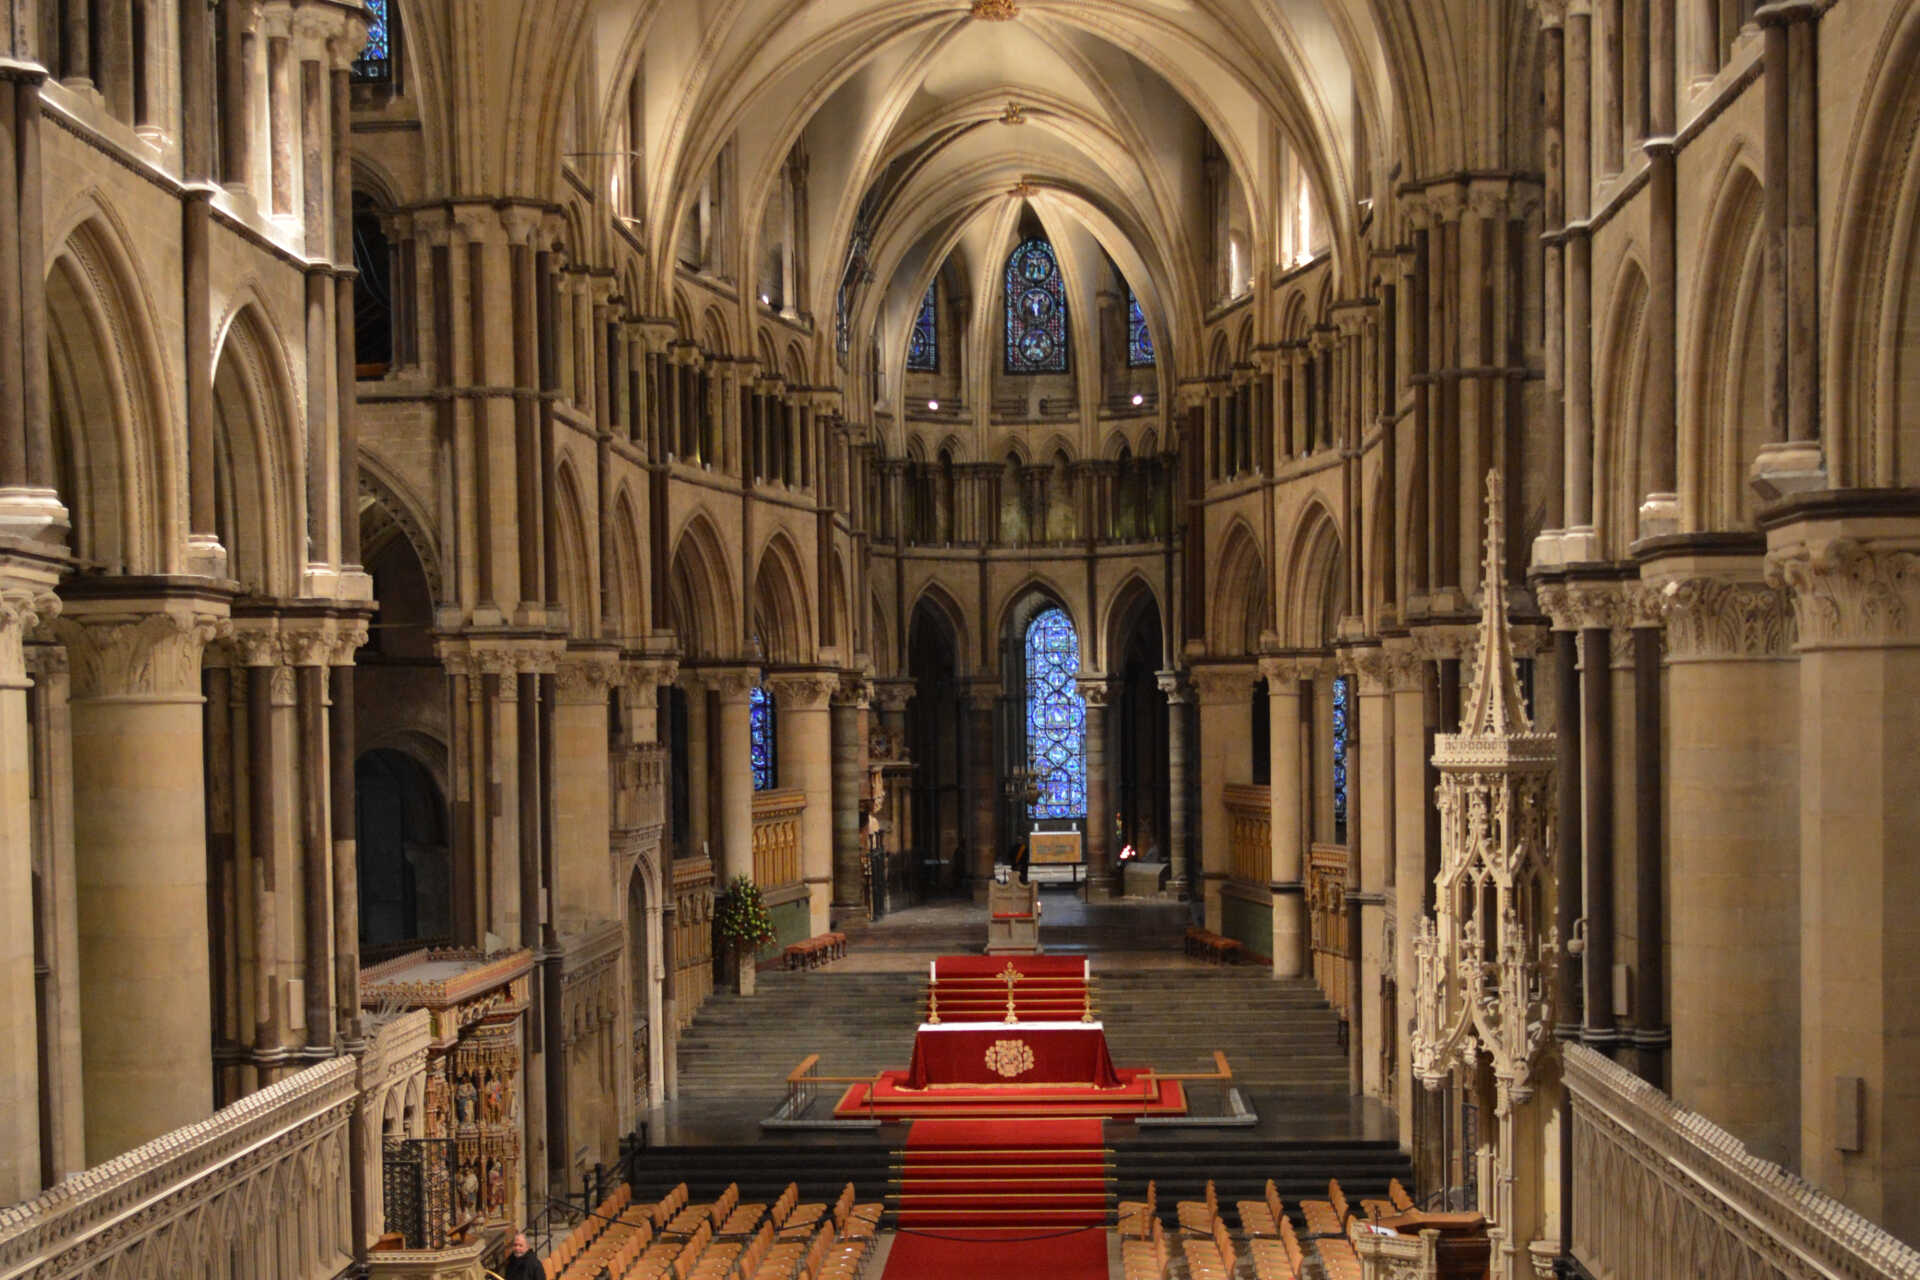 View of the Quire of Canterbury Cathedral